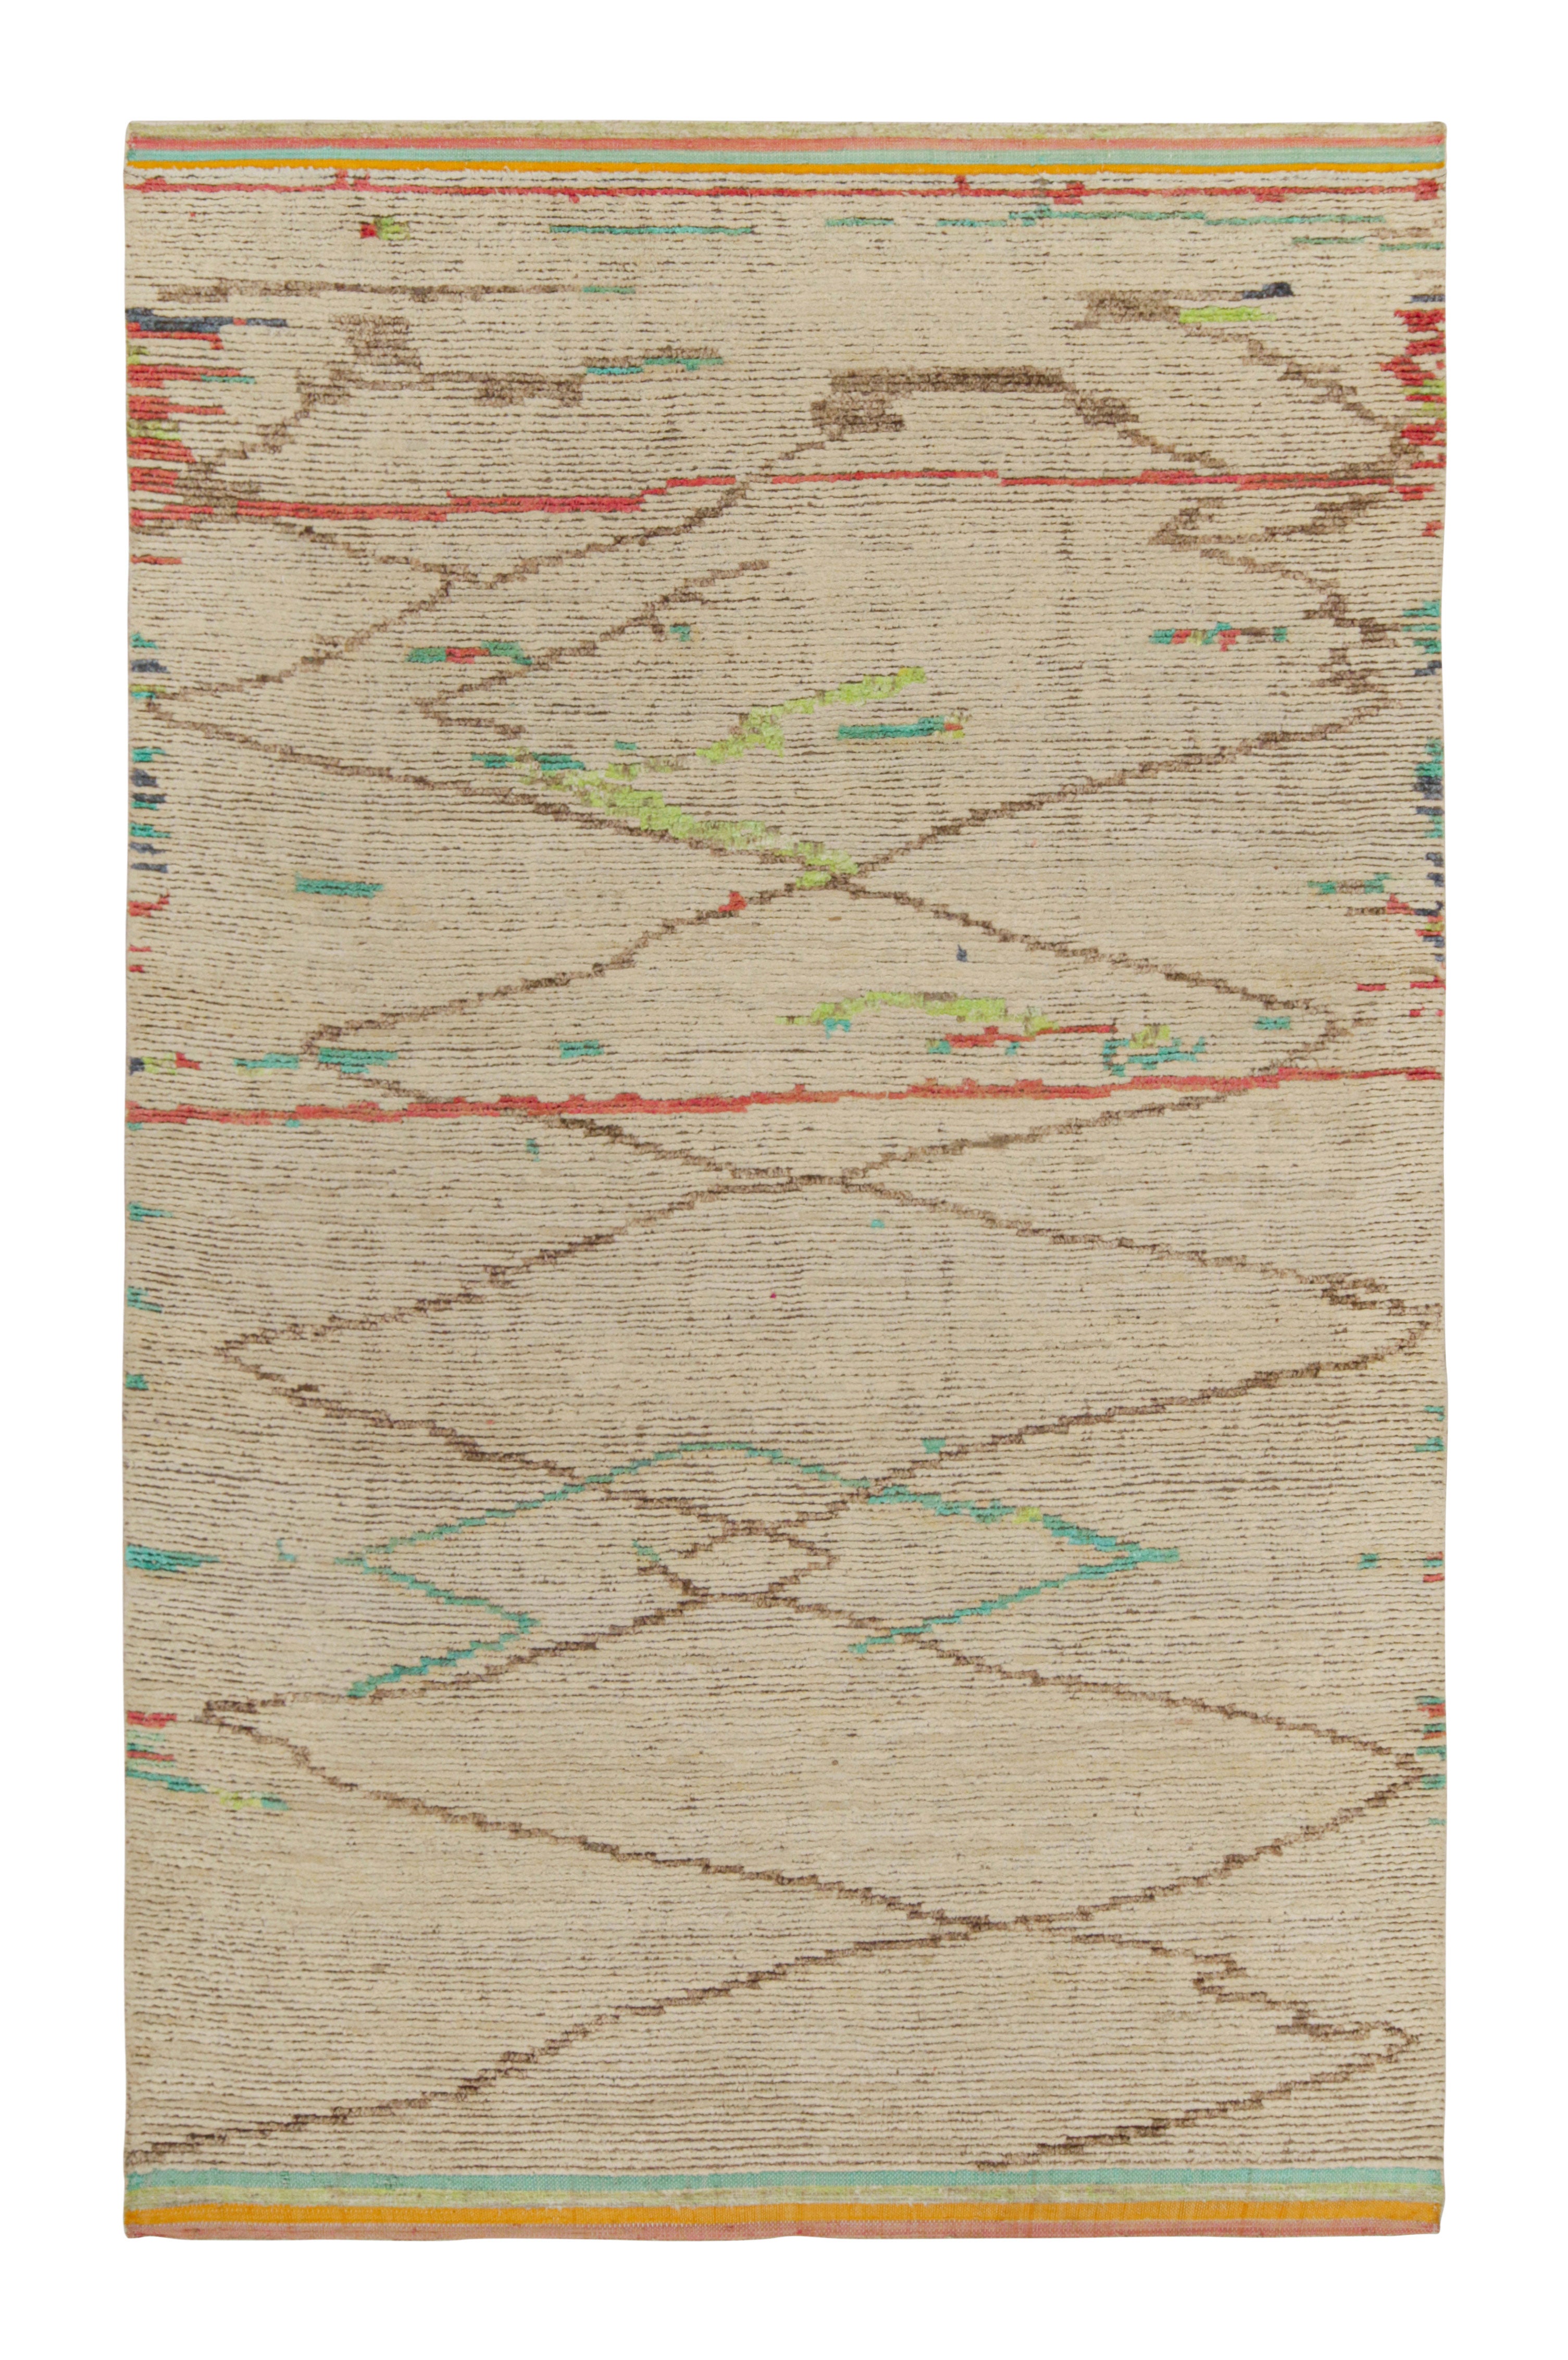 Rug & Kilim’s Moroccan style rug in Beige-Brown, Red and Green Geometric Pattern For Sale